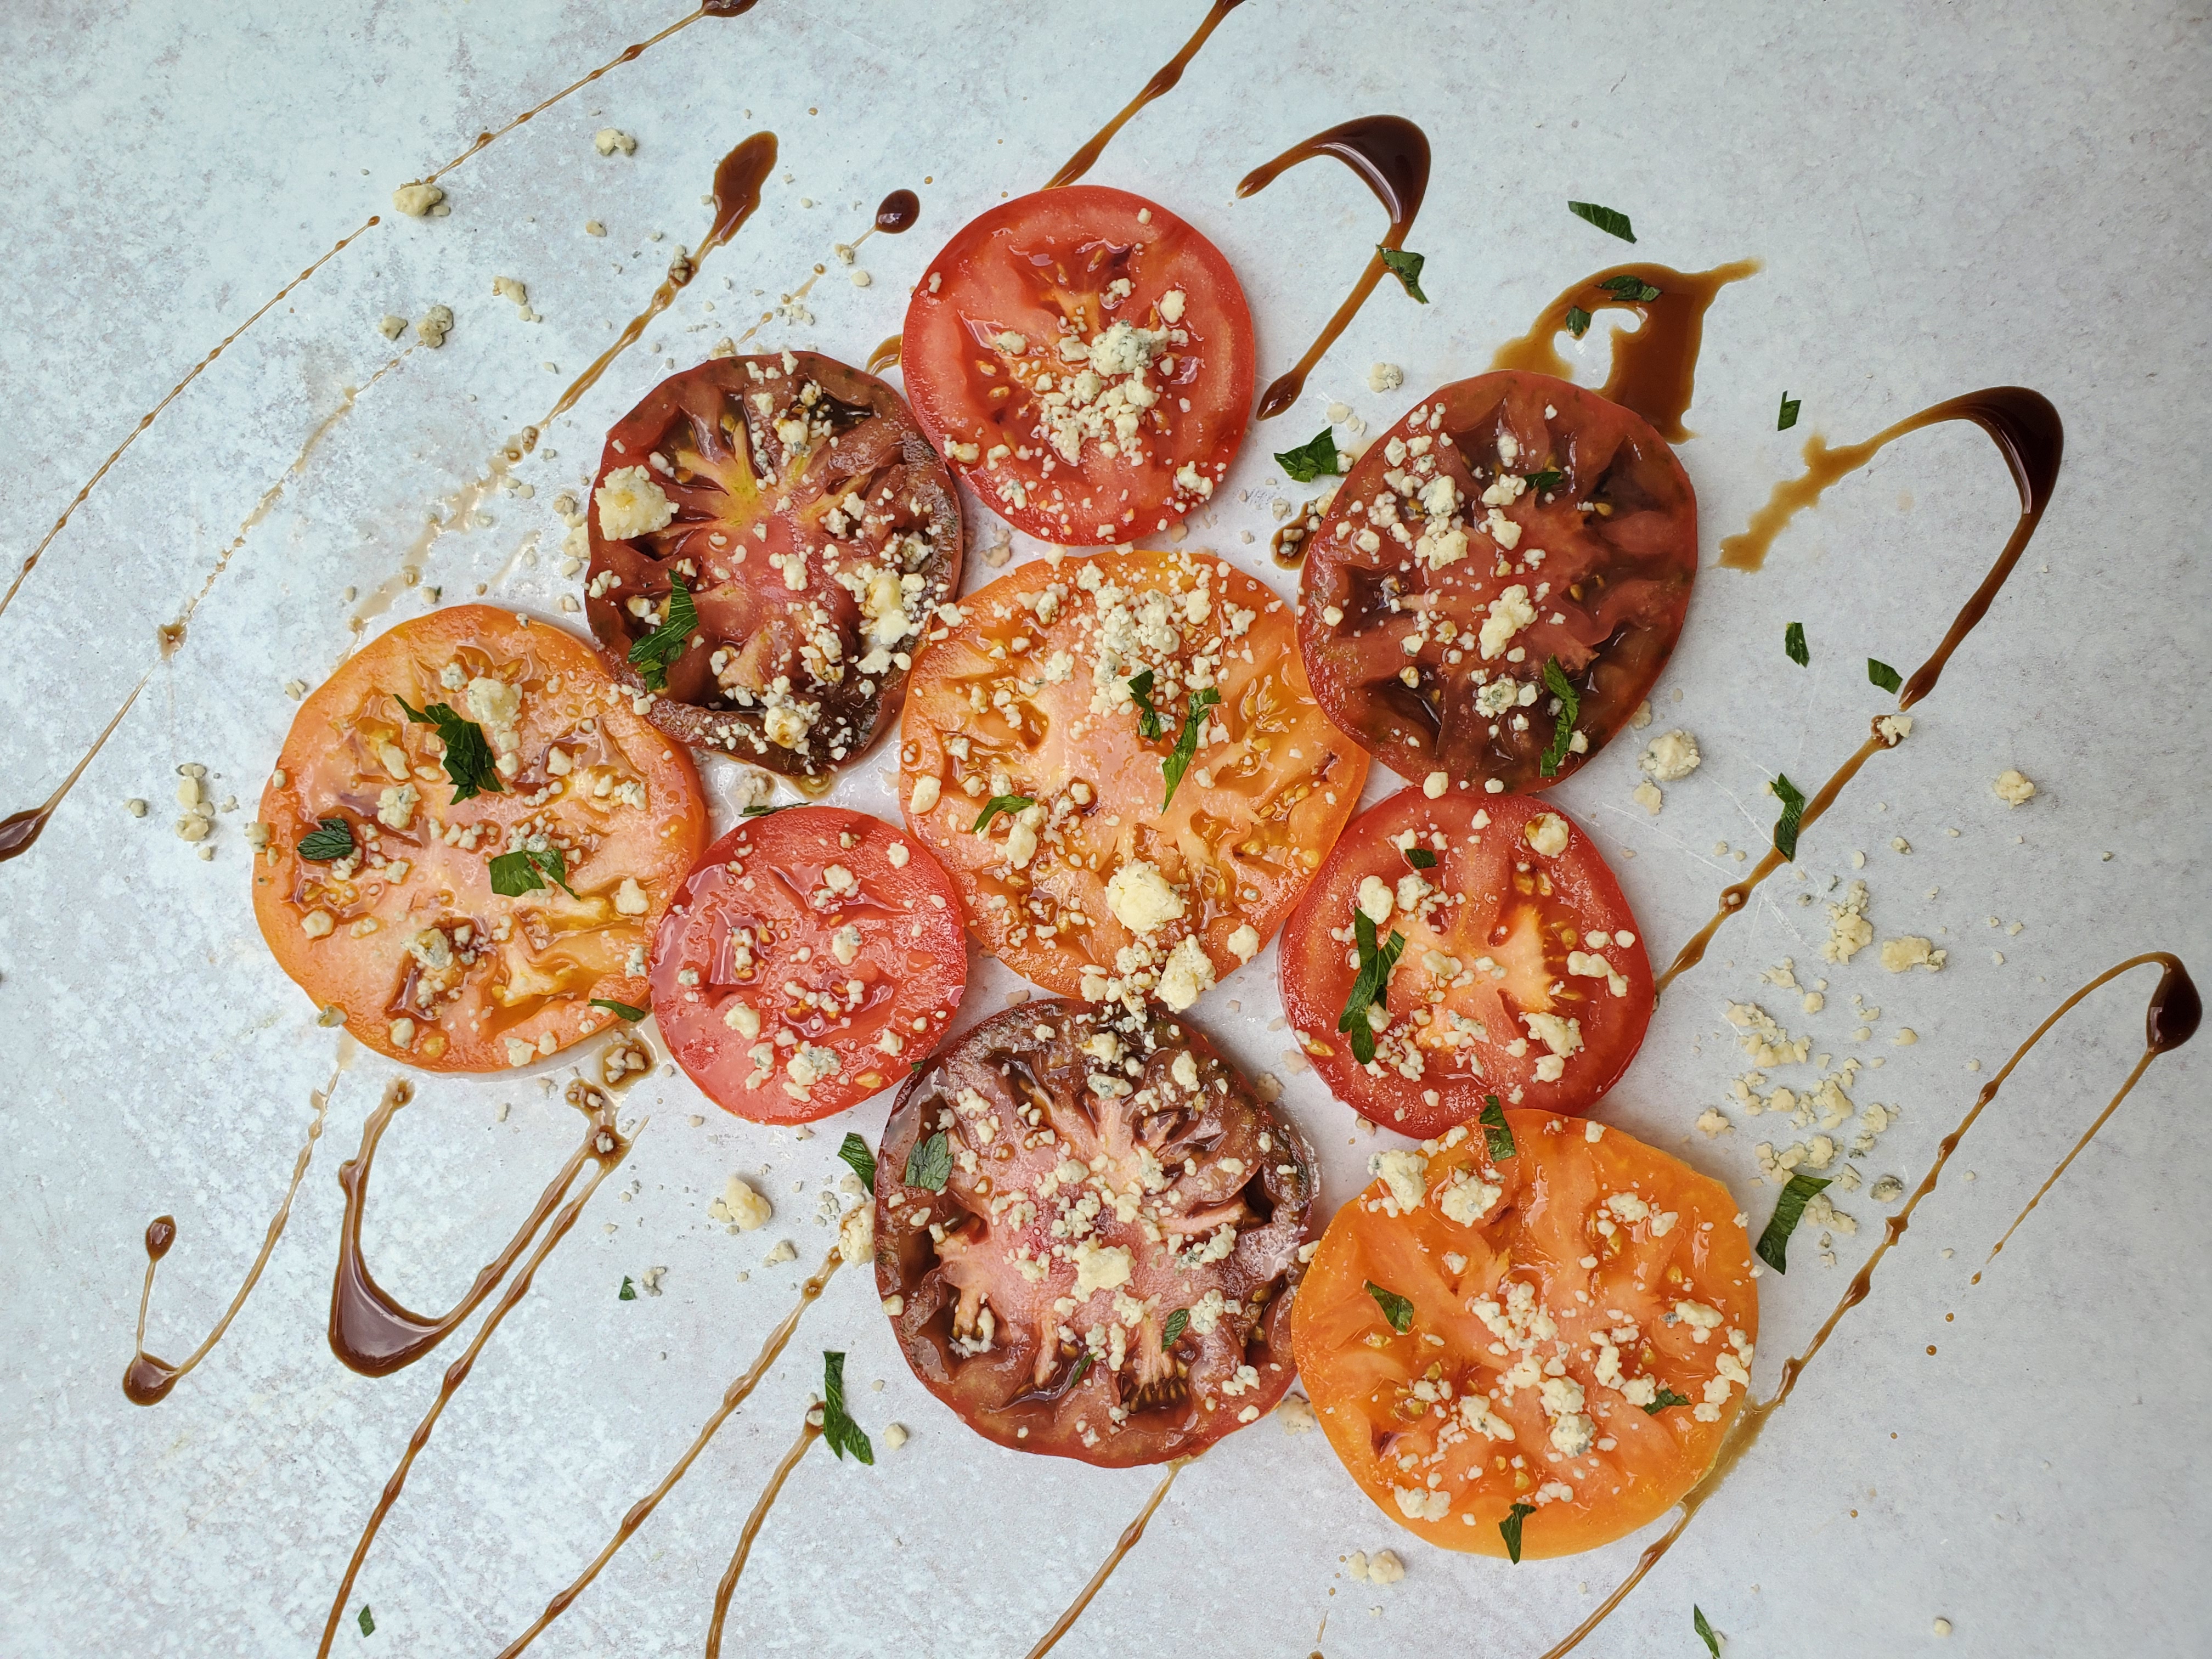 Heirloom Tomatoes sliced with cheese crumbled on top and balsamic glaze drizzled on top